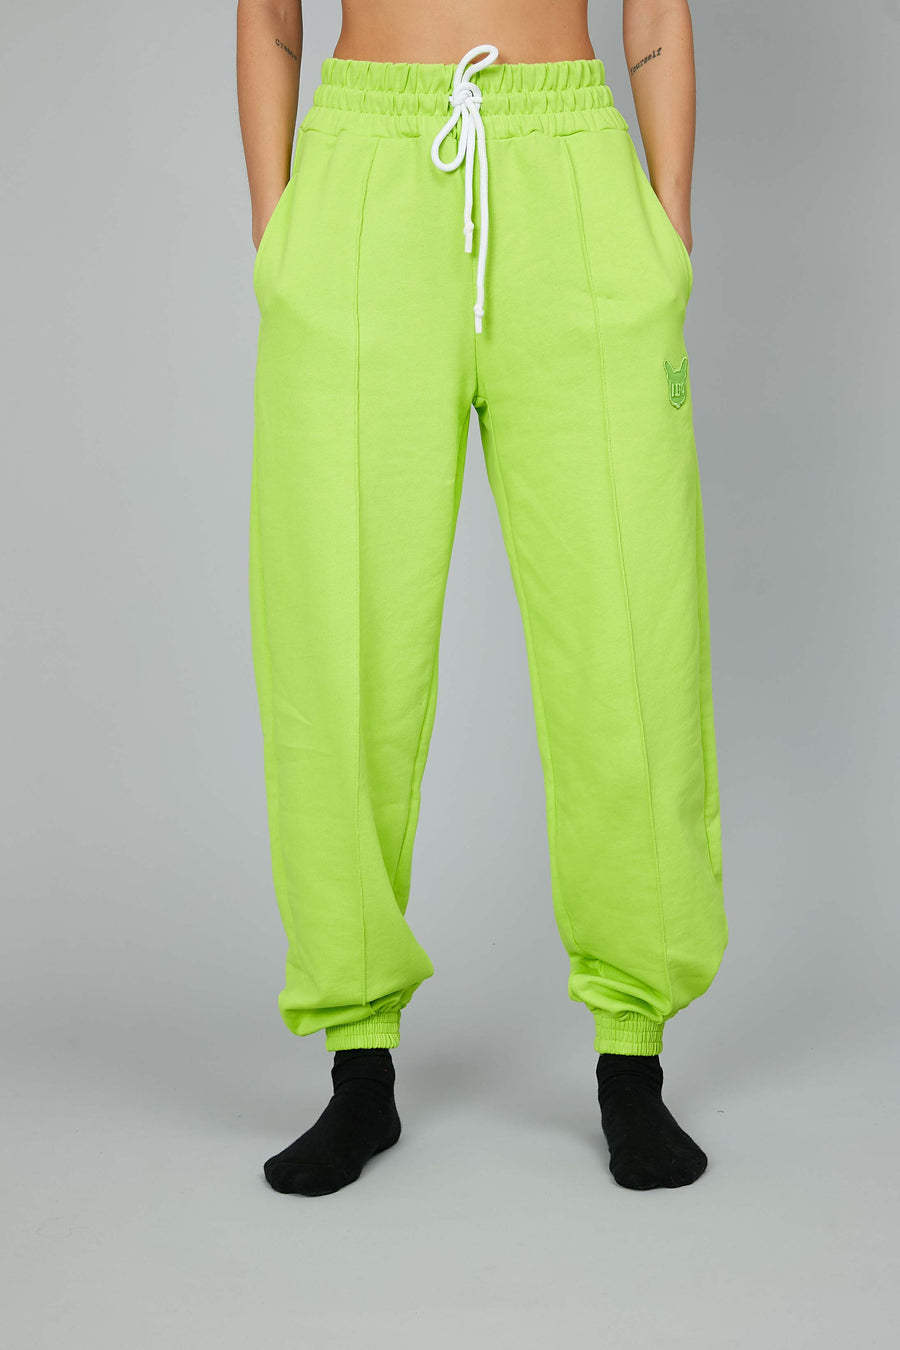 PITTBULL LIME TROUSERS